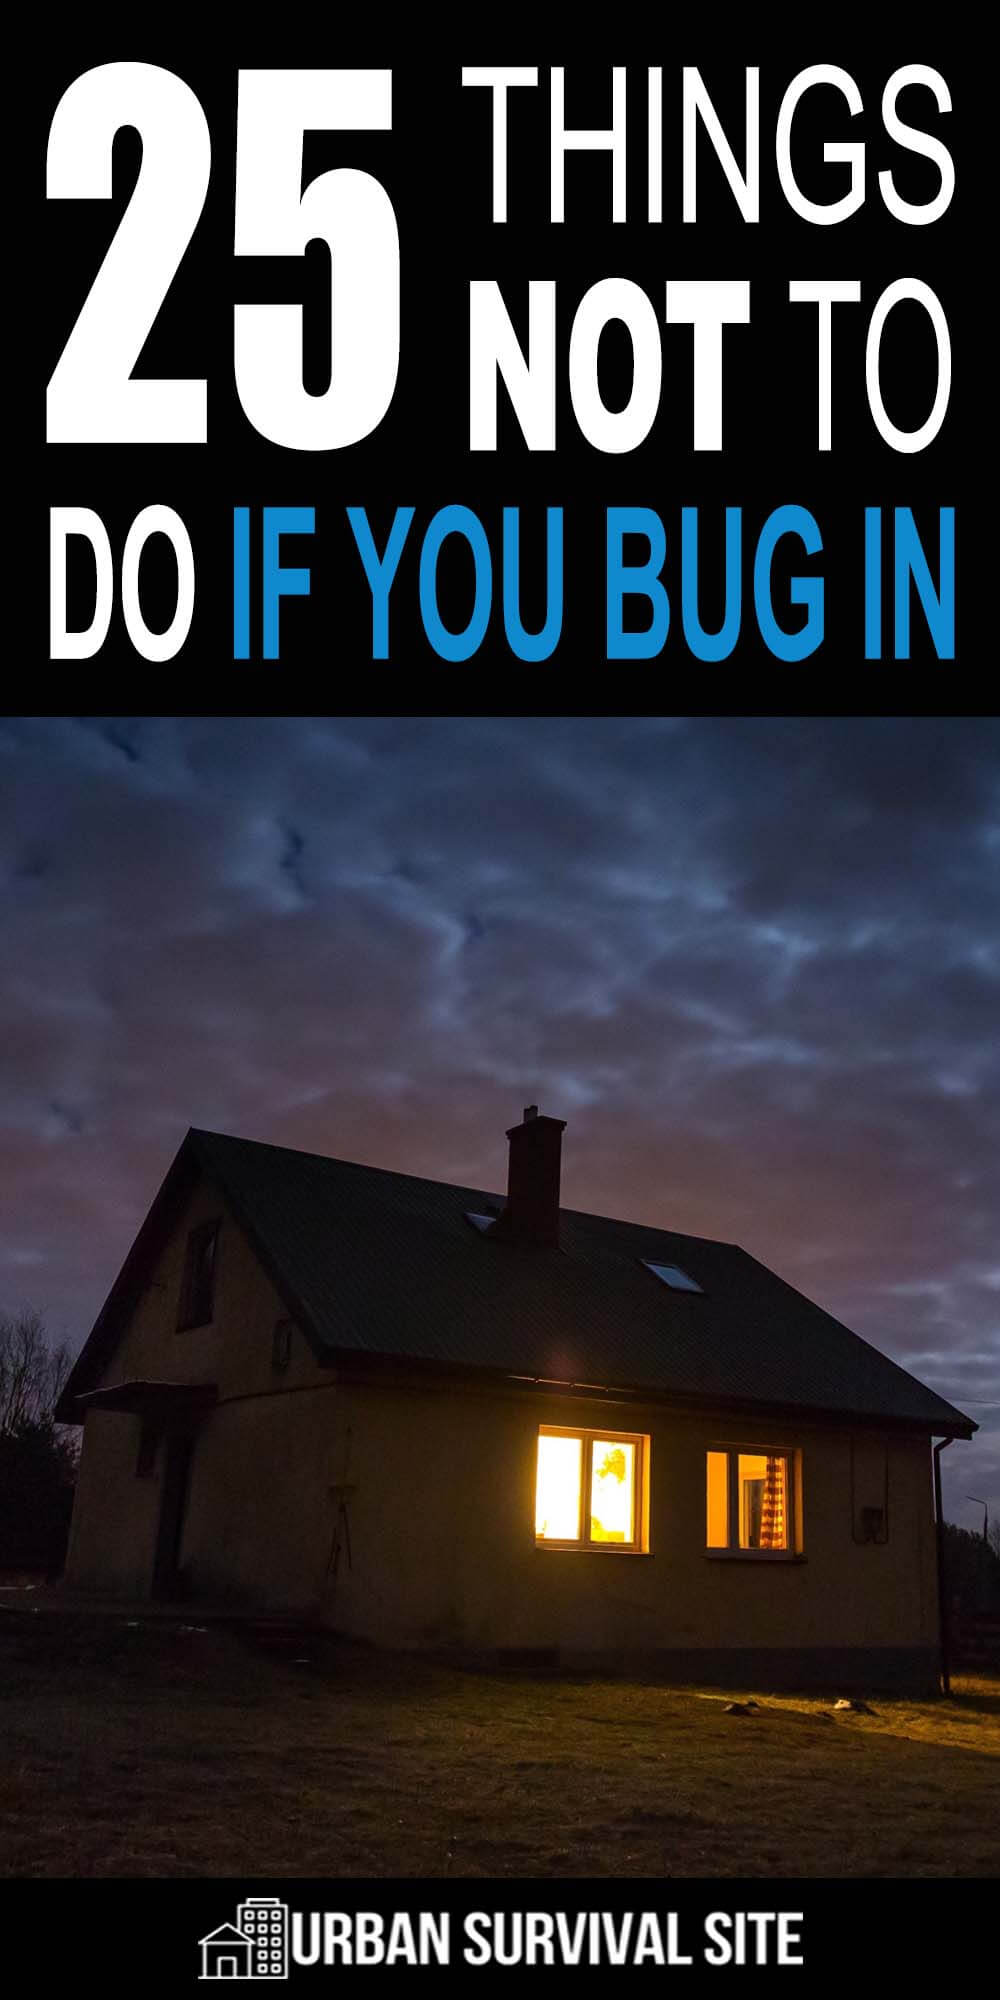 25 Things NOT To Do If You Bug In